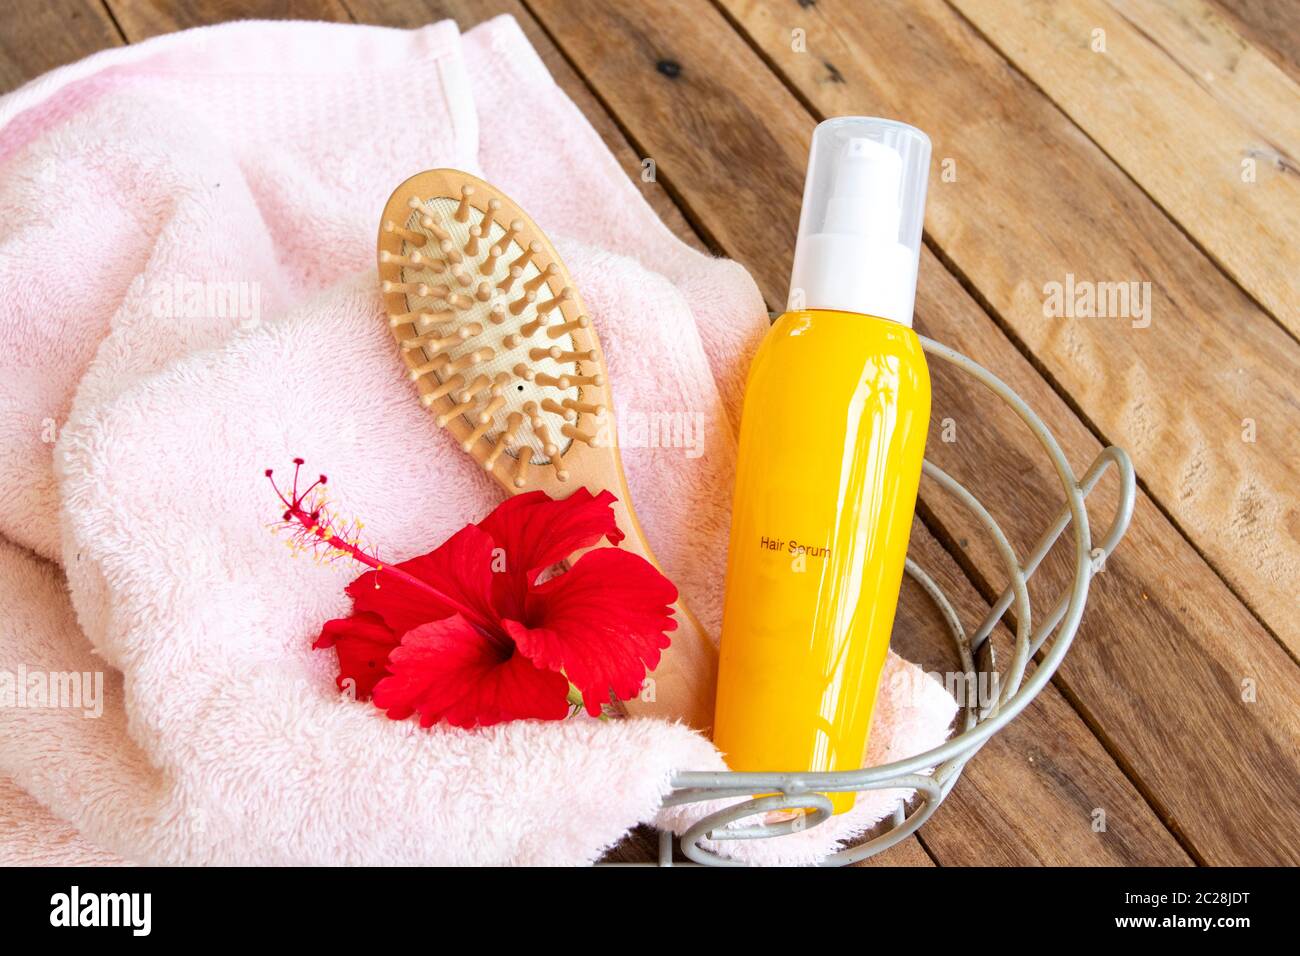 hair care serum for damaged hairs with comb health care beauty head and hairs with terry cloth in basket of lifestyle woman arrangement flat lay style Stock Photo